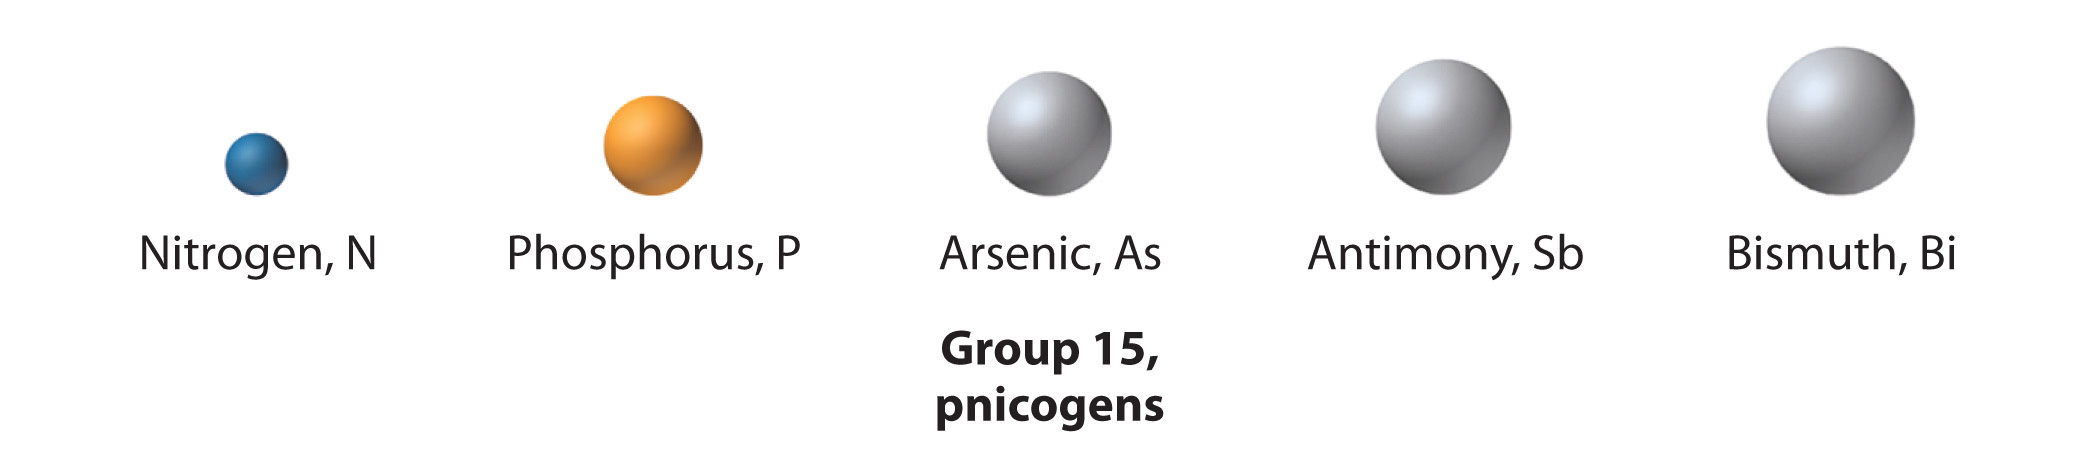 The elements of group 15, the pnicogens, are shown.